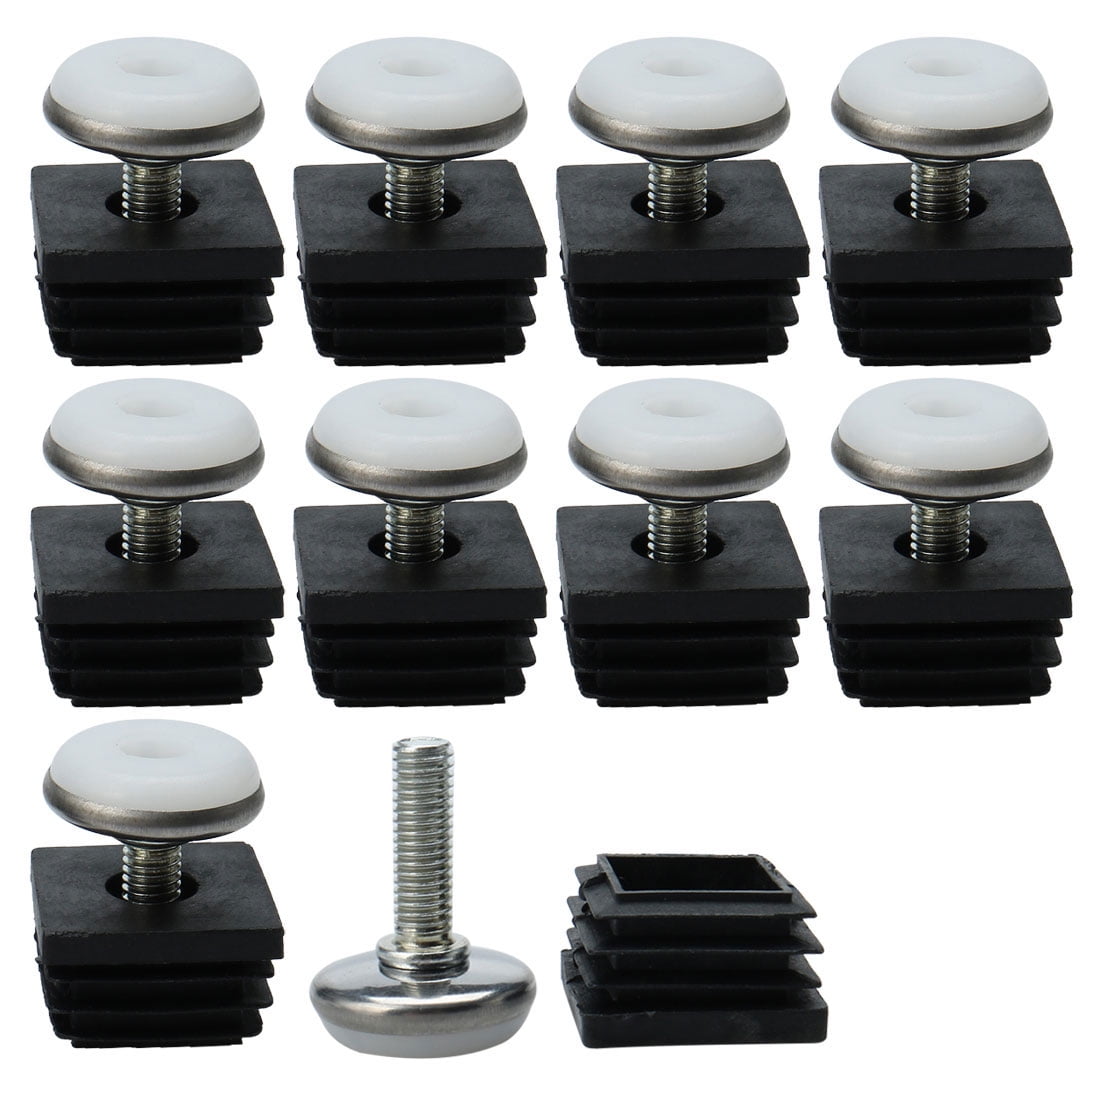 uxcell 19mm x 19mm Thread Tube Insert Adjustable Leveling Foot 10 Sets for Desk Table